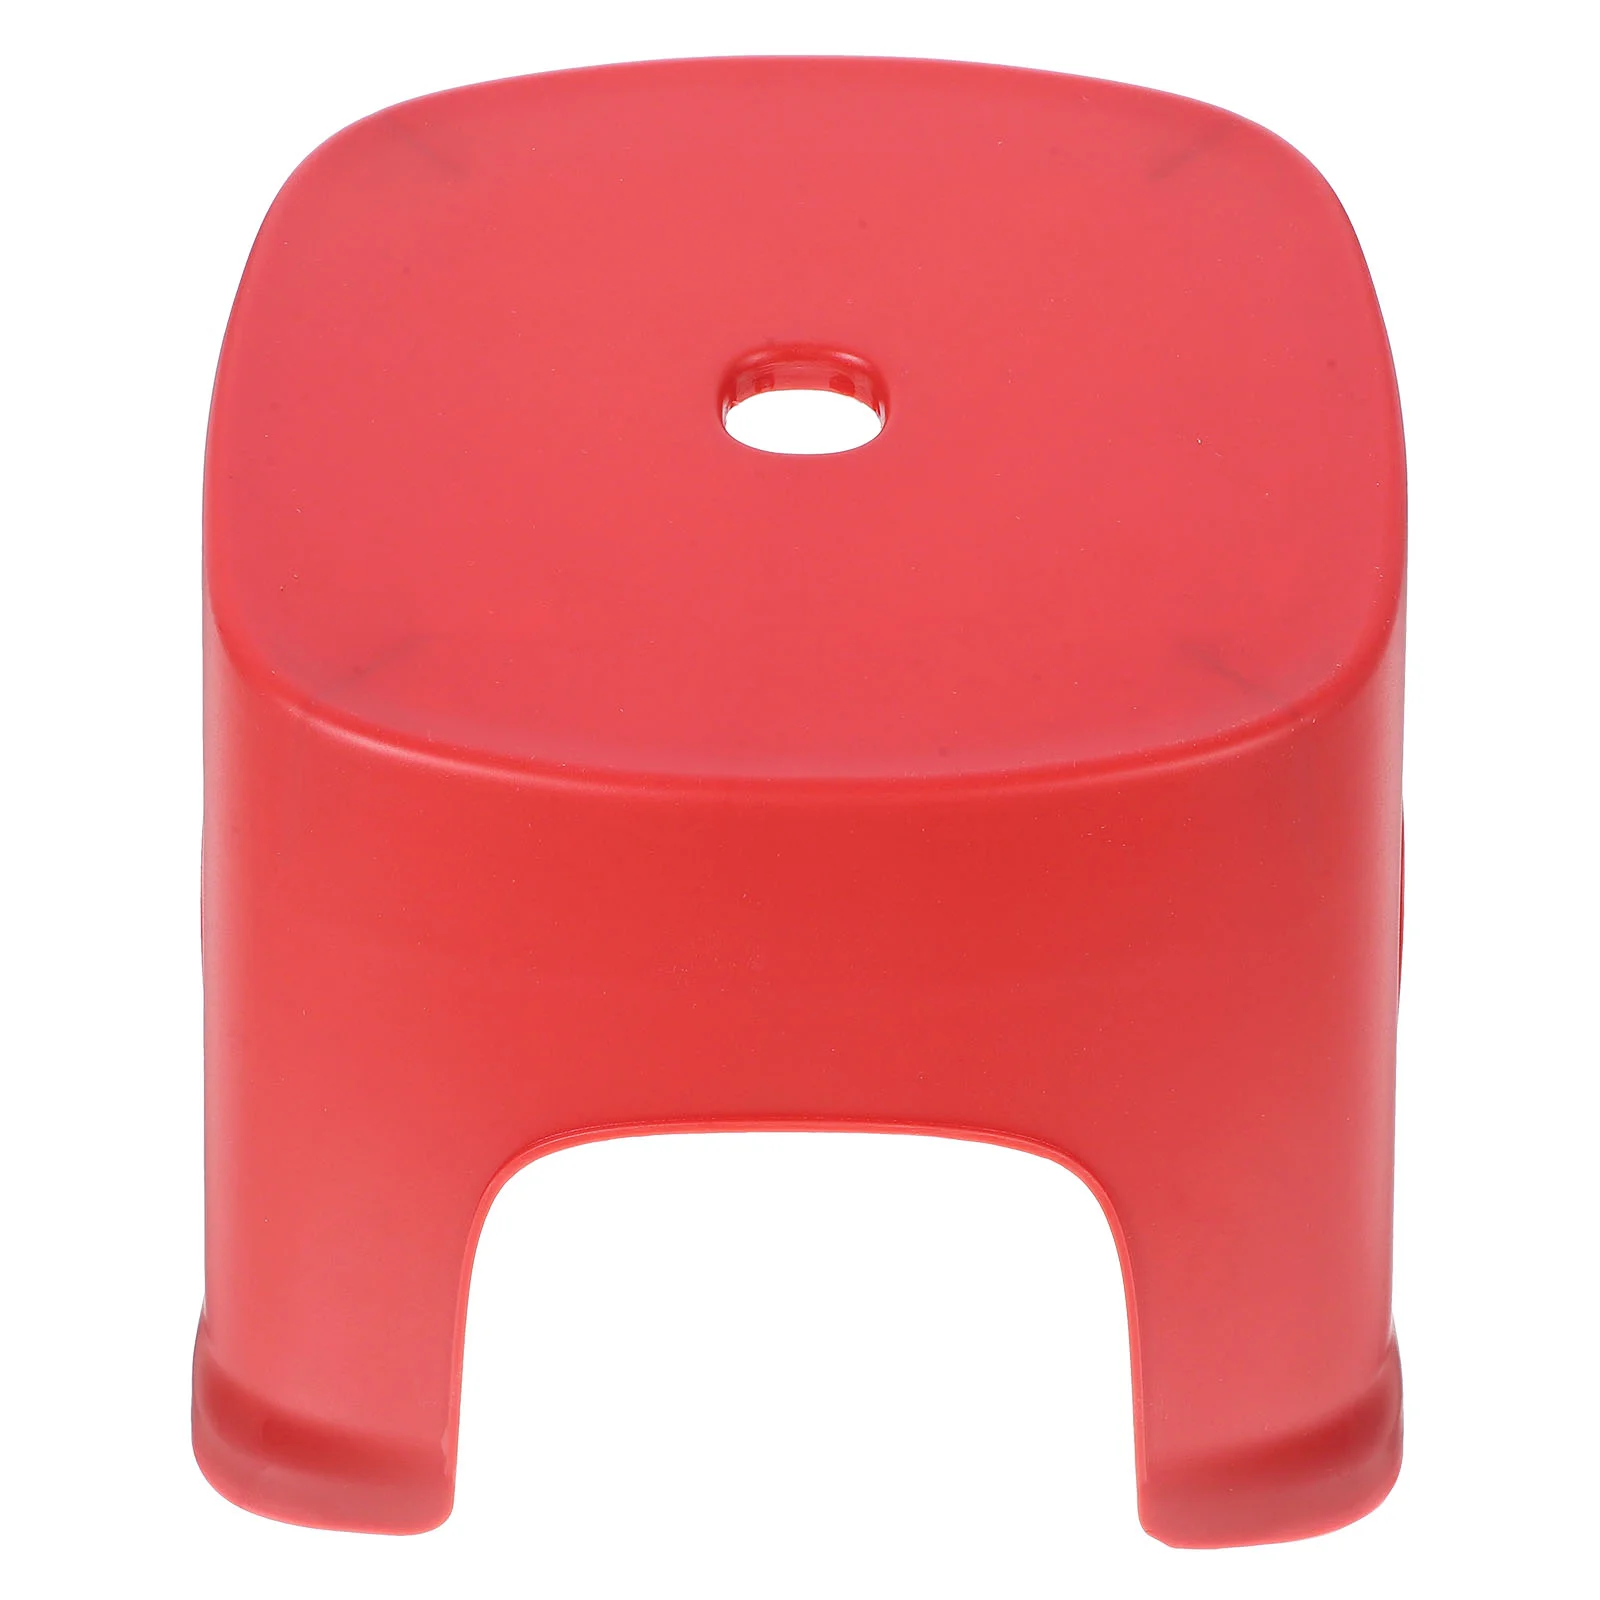 

Low Stool Kids Step Stools Stepping Foot Bathroom Toilet Toddler Steps Adults Toddlers Portable Potty